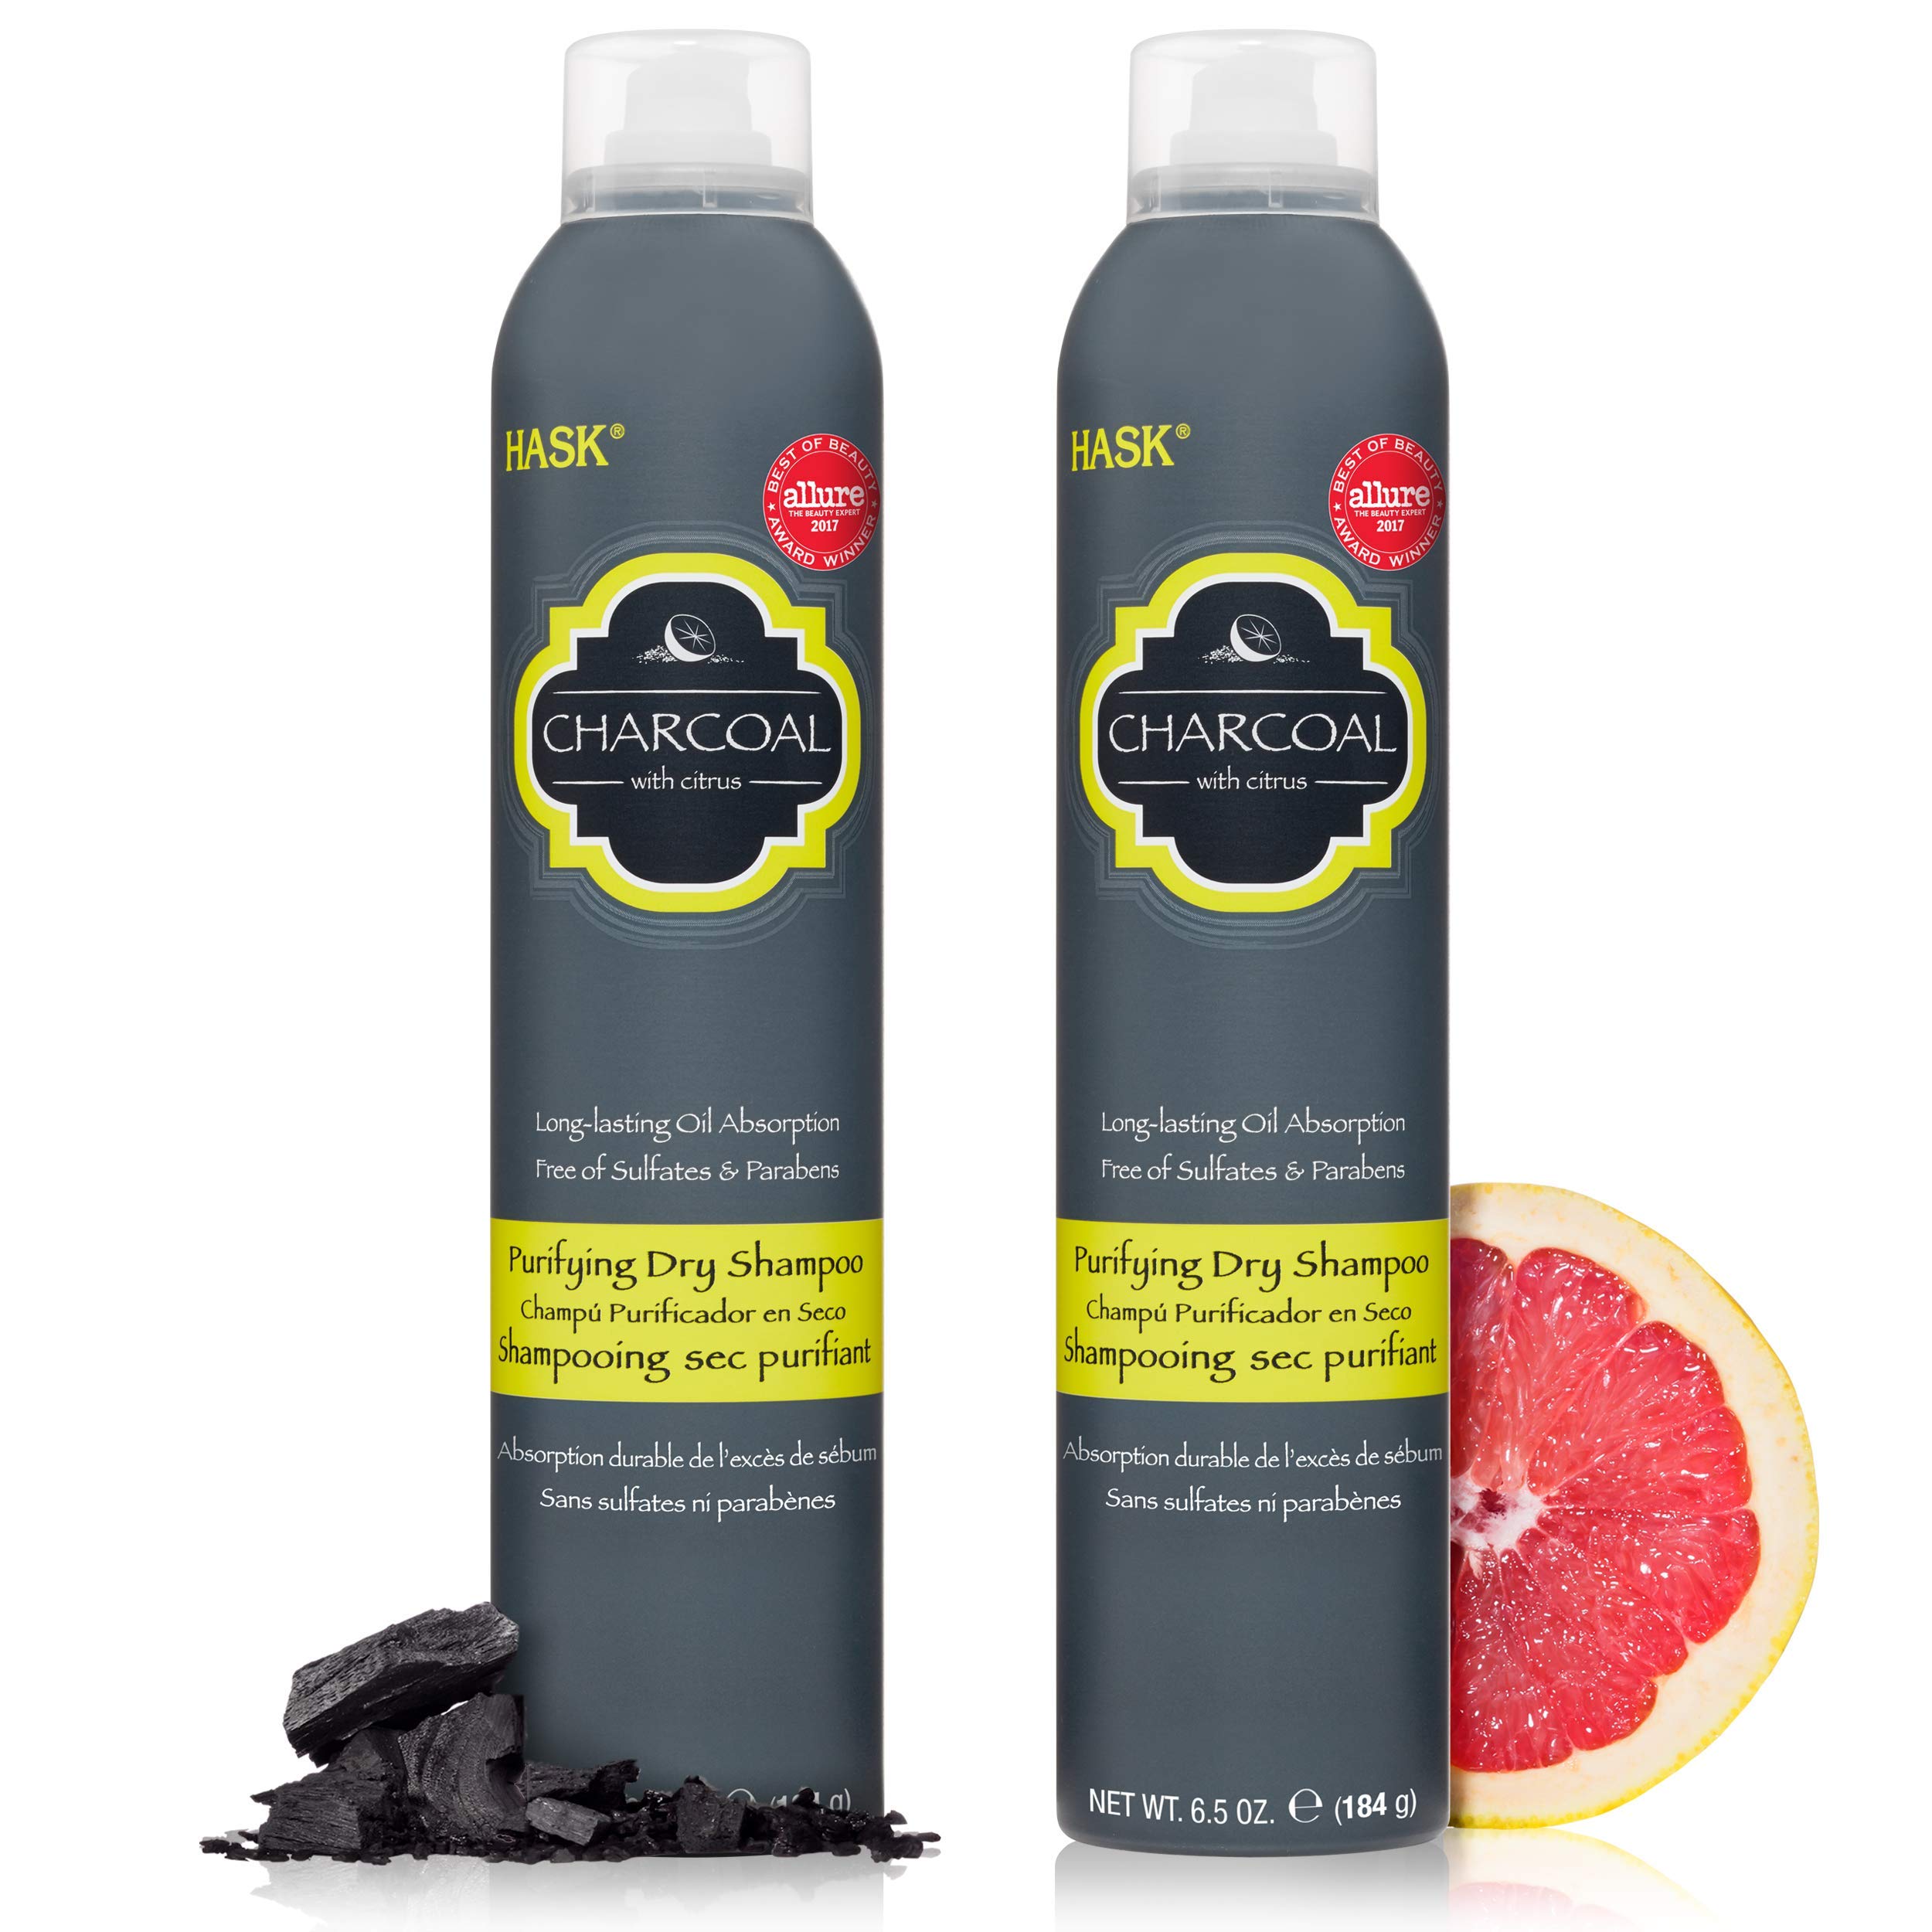 HASK Charcoal Clarifying Dry Shampoo Kits for all hair types, aluminum free, no sulfates, parabens, phthalates, gluten or artificial colors (6.5oz-Qty2)